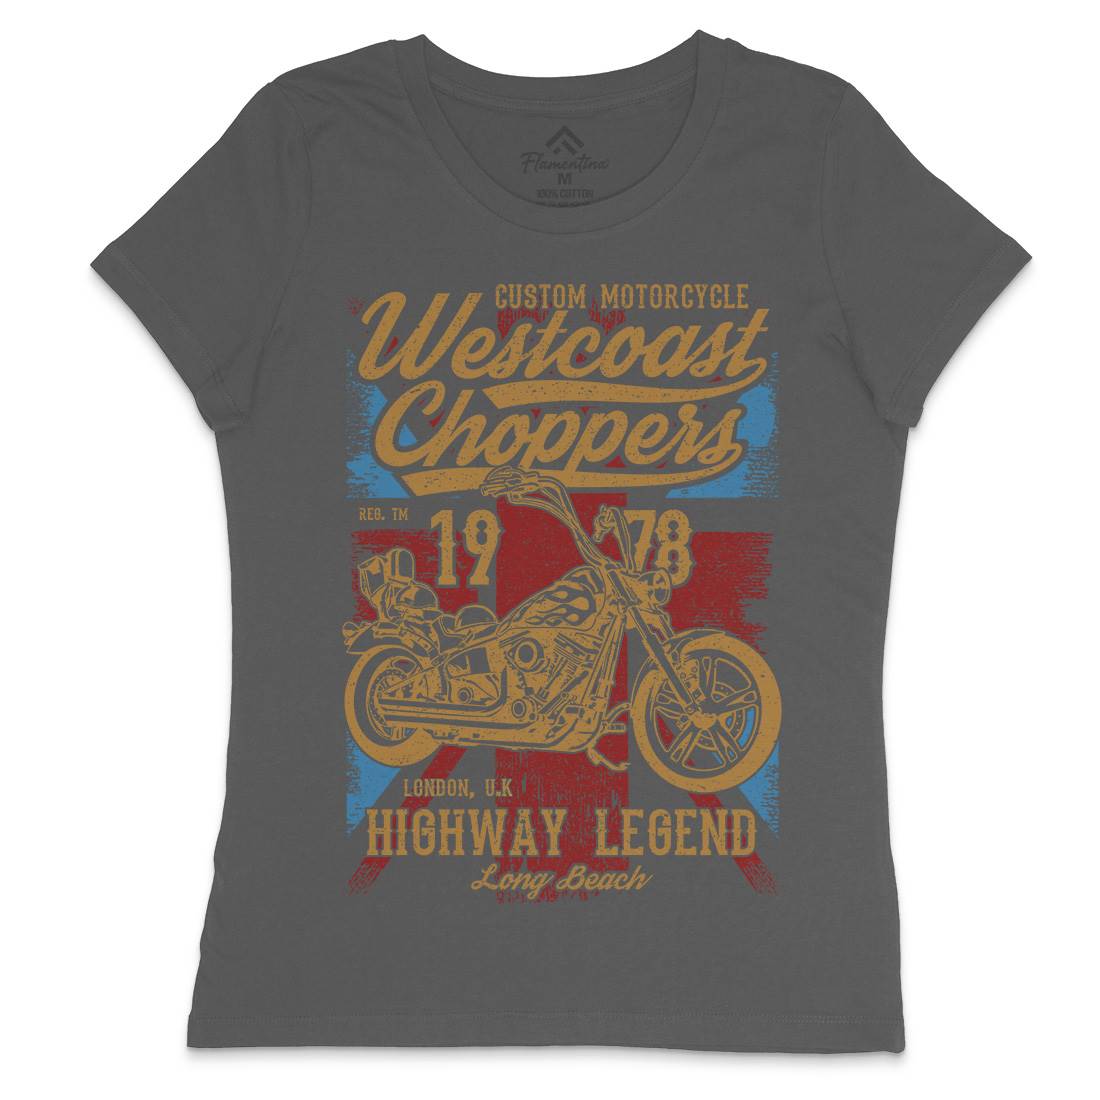 Westcoast Choppers Womens Crew Neck T-Shirt Motorcycles A791